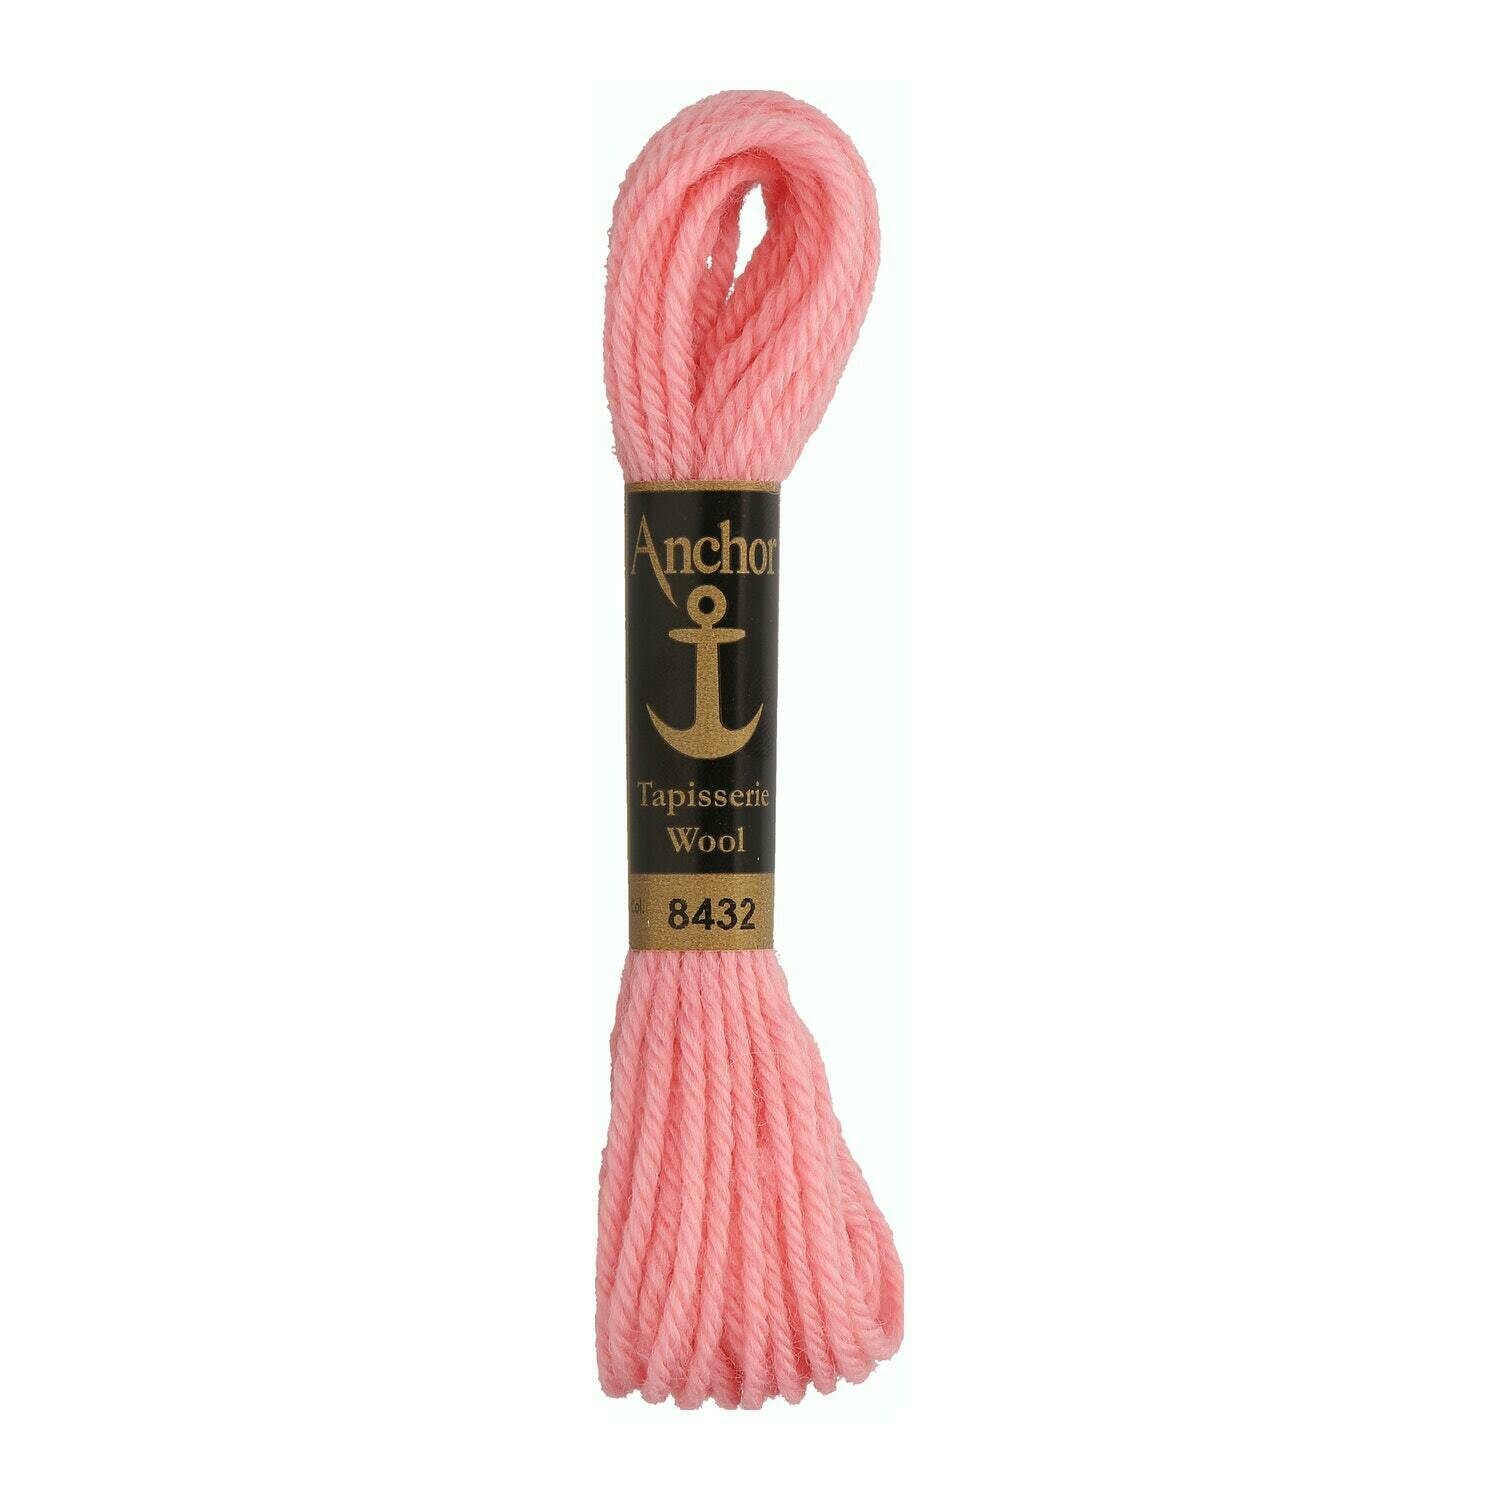 Anchor Tapisserie Wool #08432